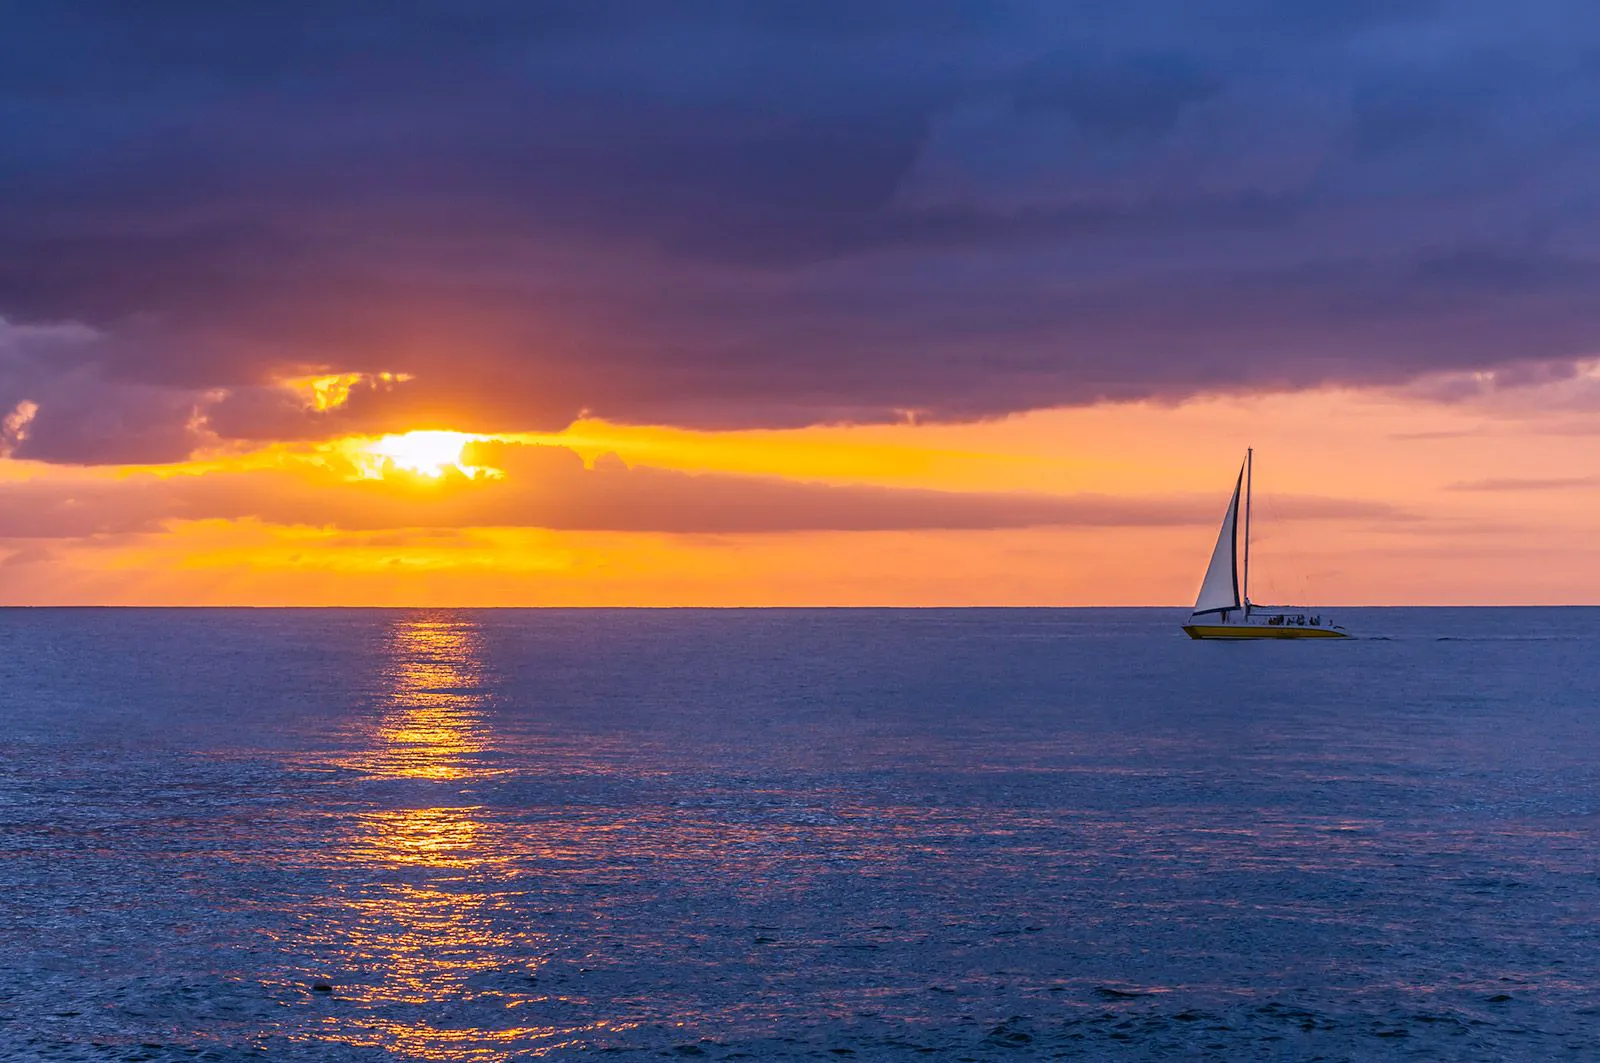 Luxury Barbados villa rentals. The sun sets over the Caribbean Sea in Barbados as a single sail boat drifts along 